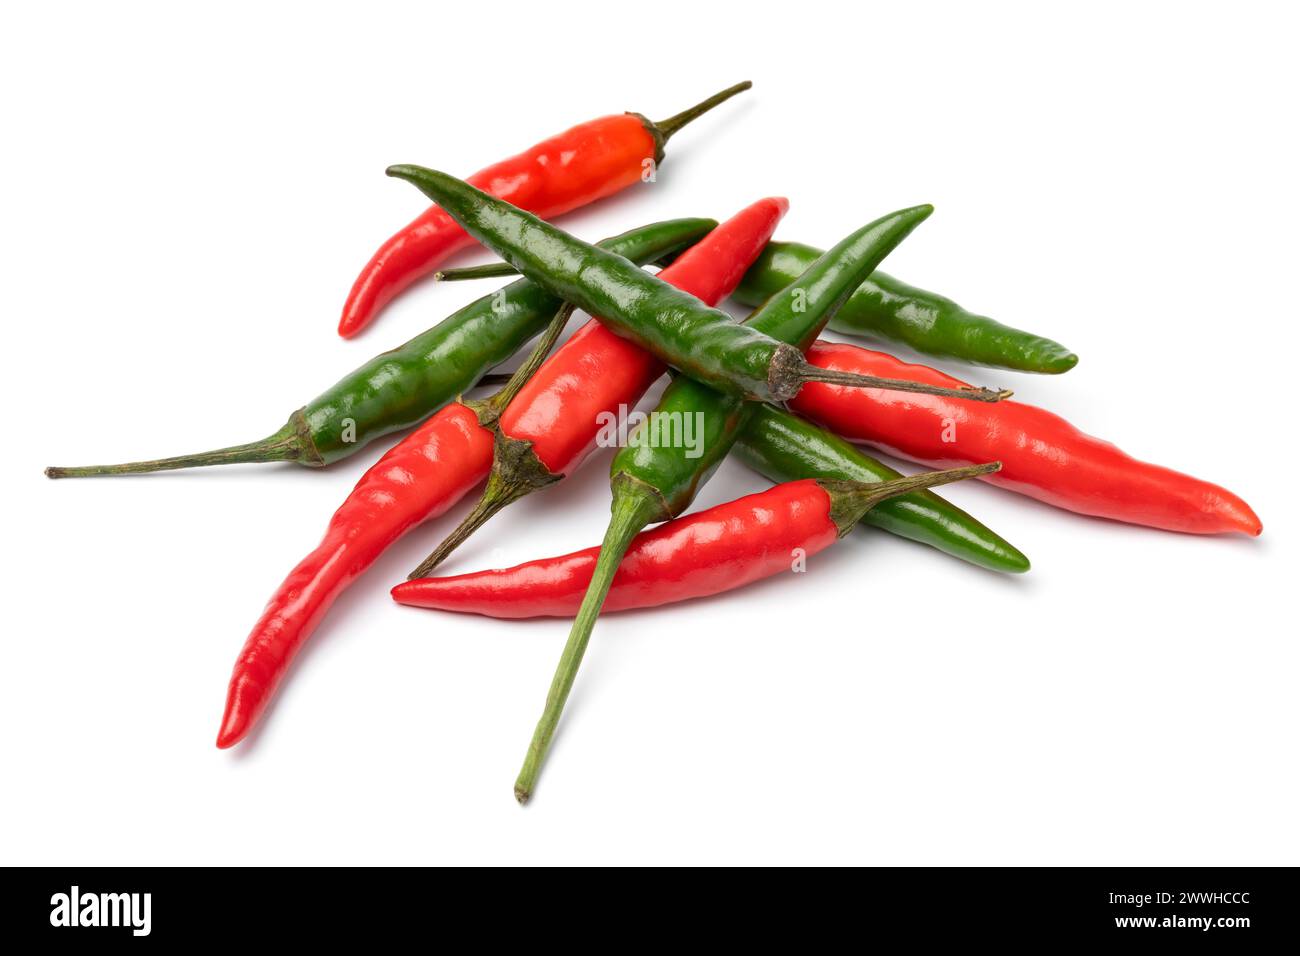 Heap of whole fresh raw green and red rawit peppers close up isolated on white background Stock Photo